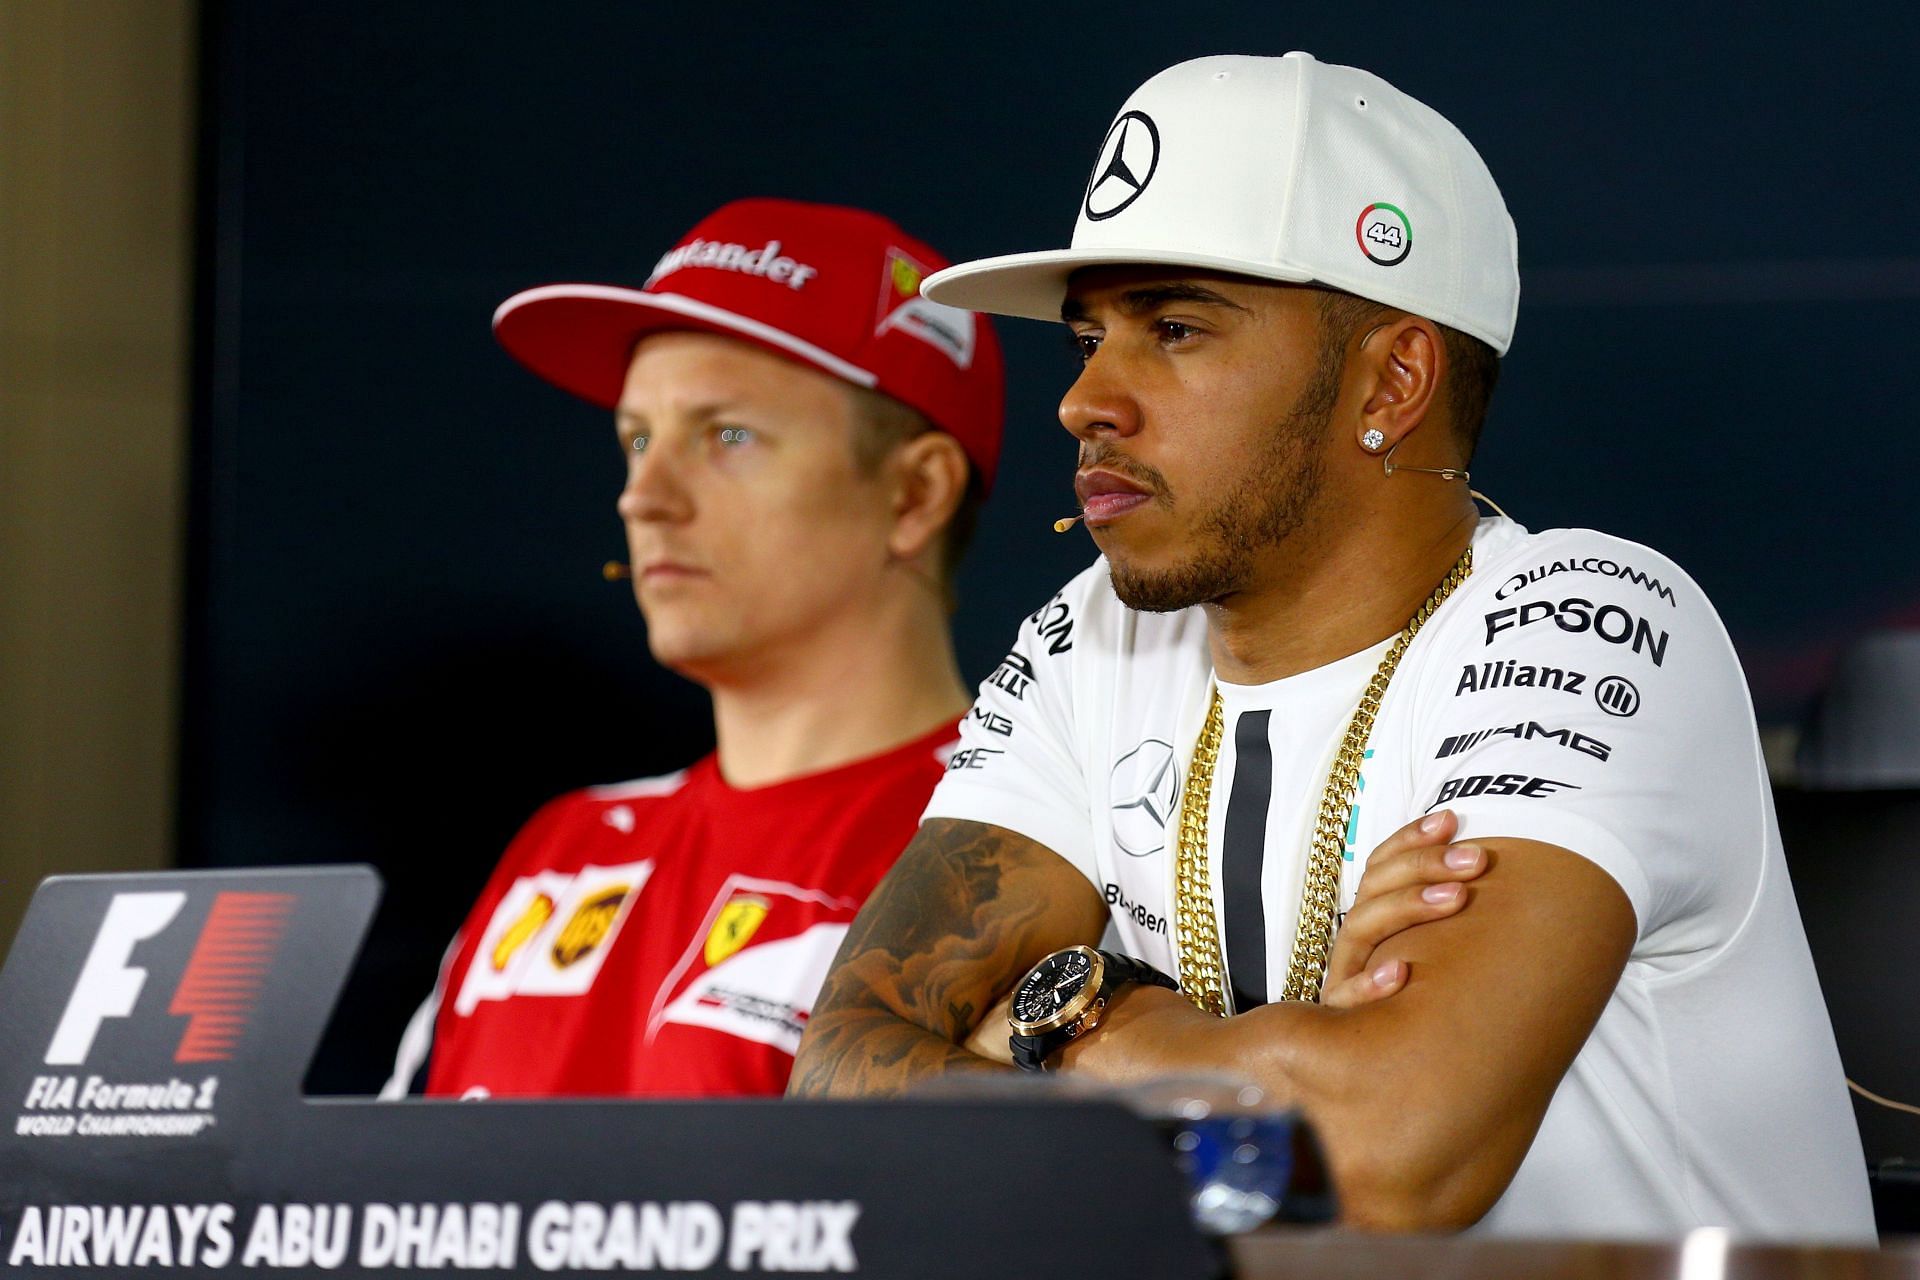 Kimi Raikkonen and Lewis Hamilton at a press conference in 2015 (Photo by Clive Mason/Getty Images)